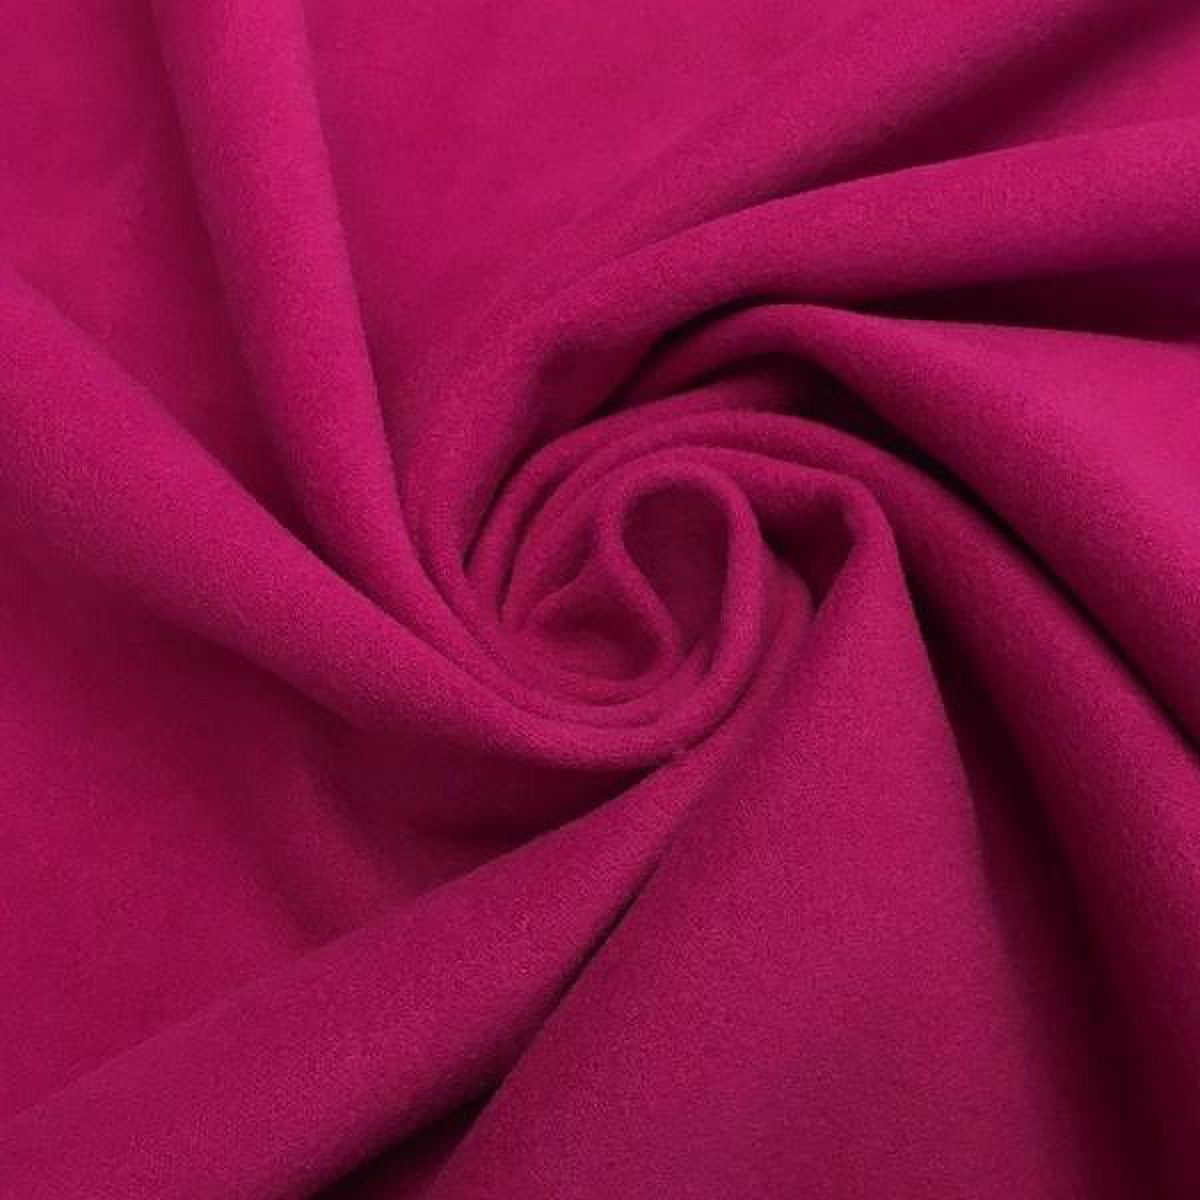 Polyester Wool Fabric Brushed Coating 59 inches Wide Soft By The Yard  Medium Heavy Weight (Magenta) 